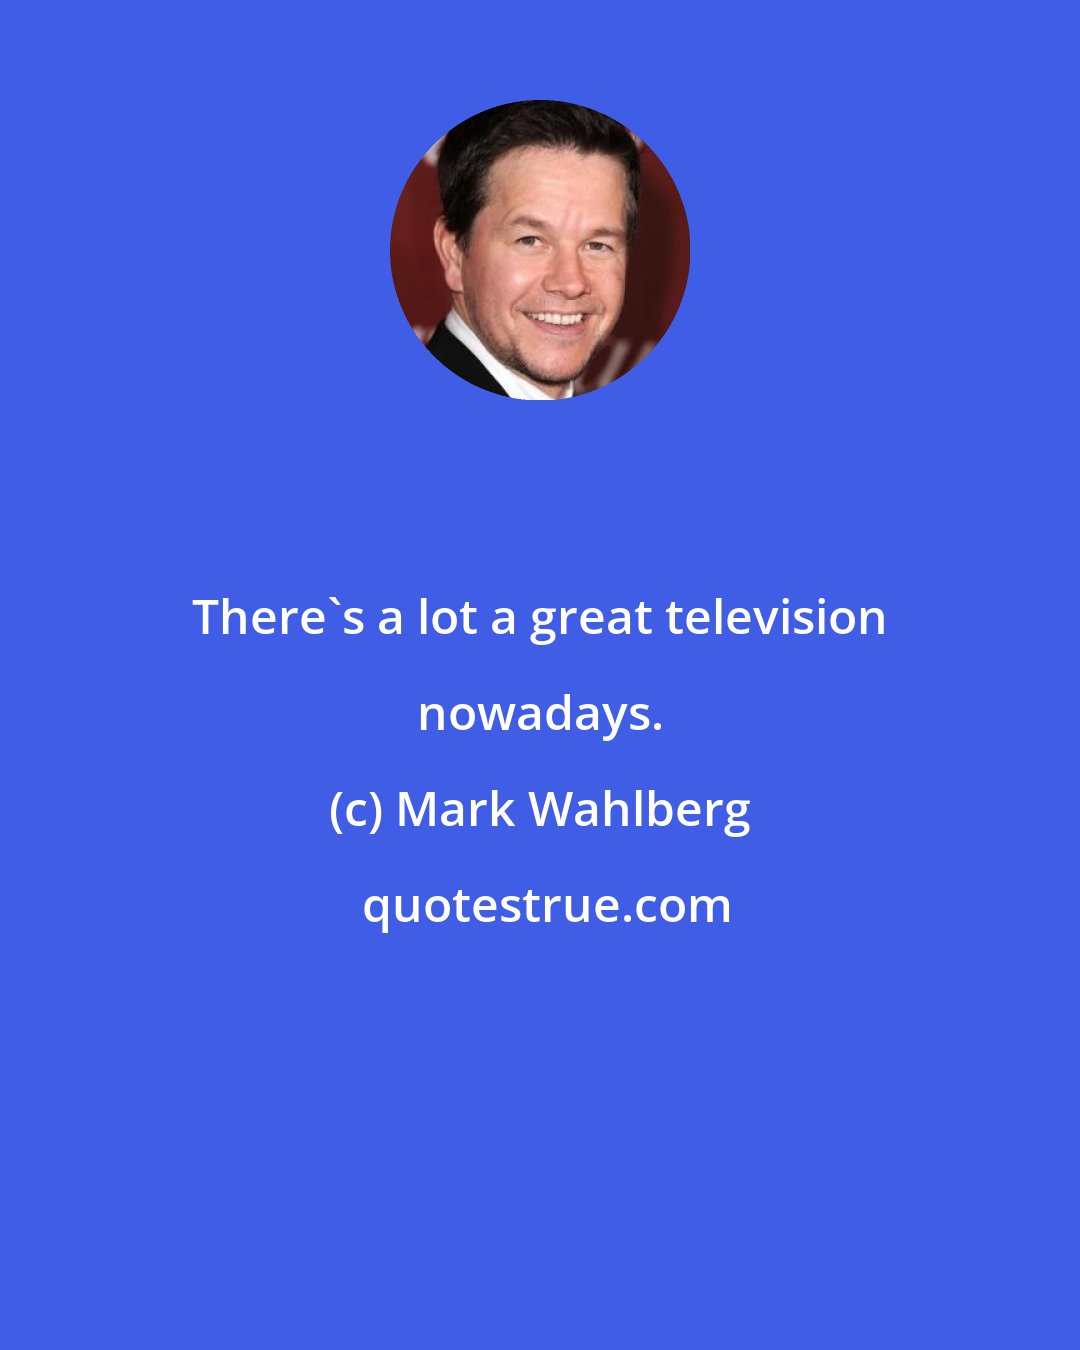 Mark Wahlberg: There's a lot a great television nowadays.